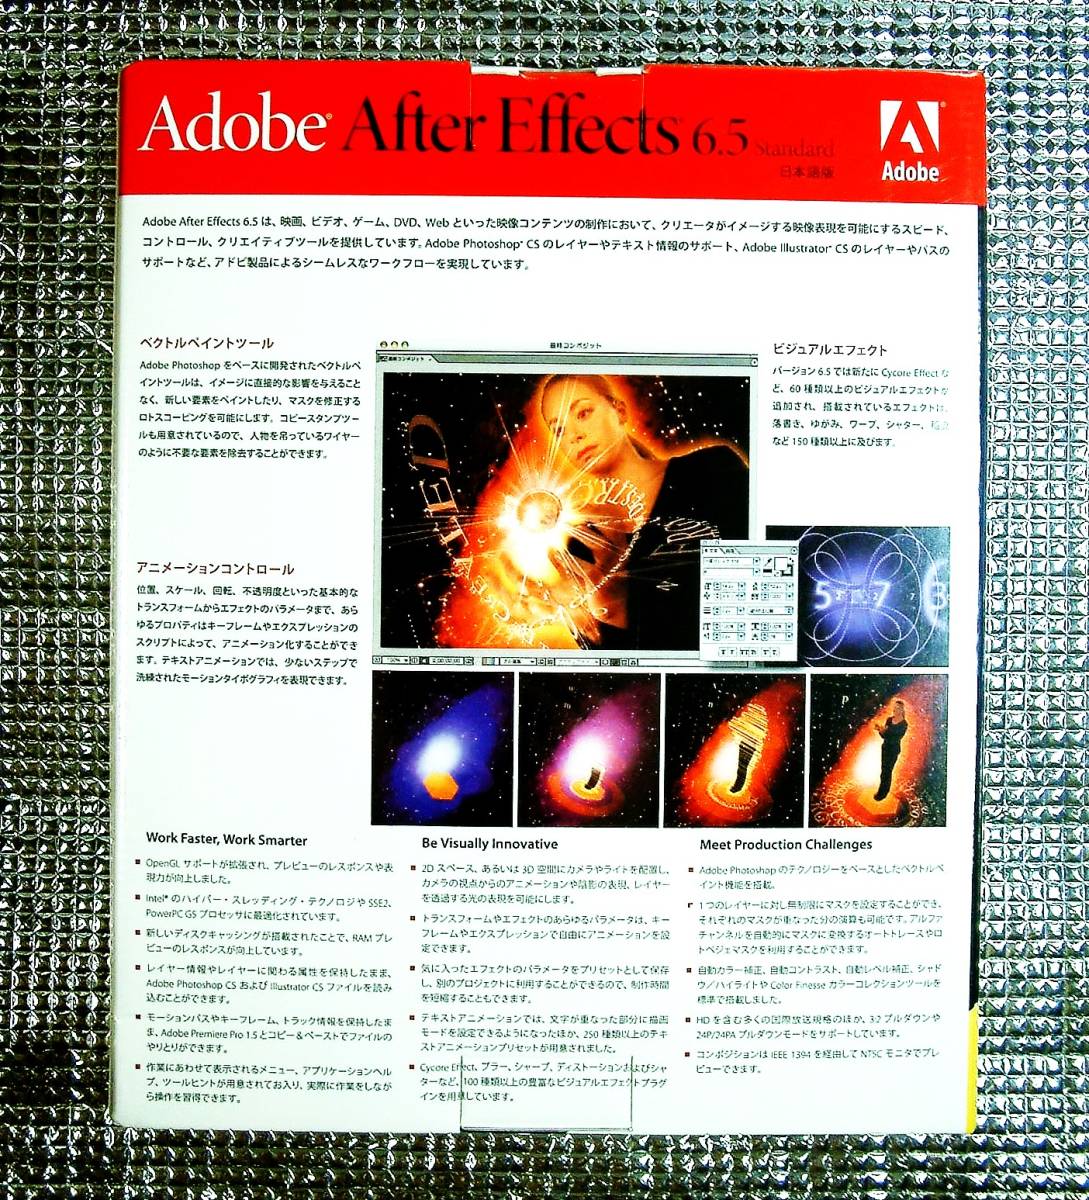 [4624]Adobe After Effects 6.5 Std UP version Ad bi after efektsuAfterEffects animation motion graphics .. effect 